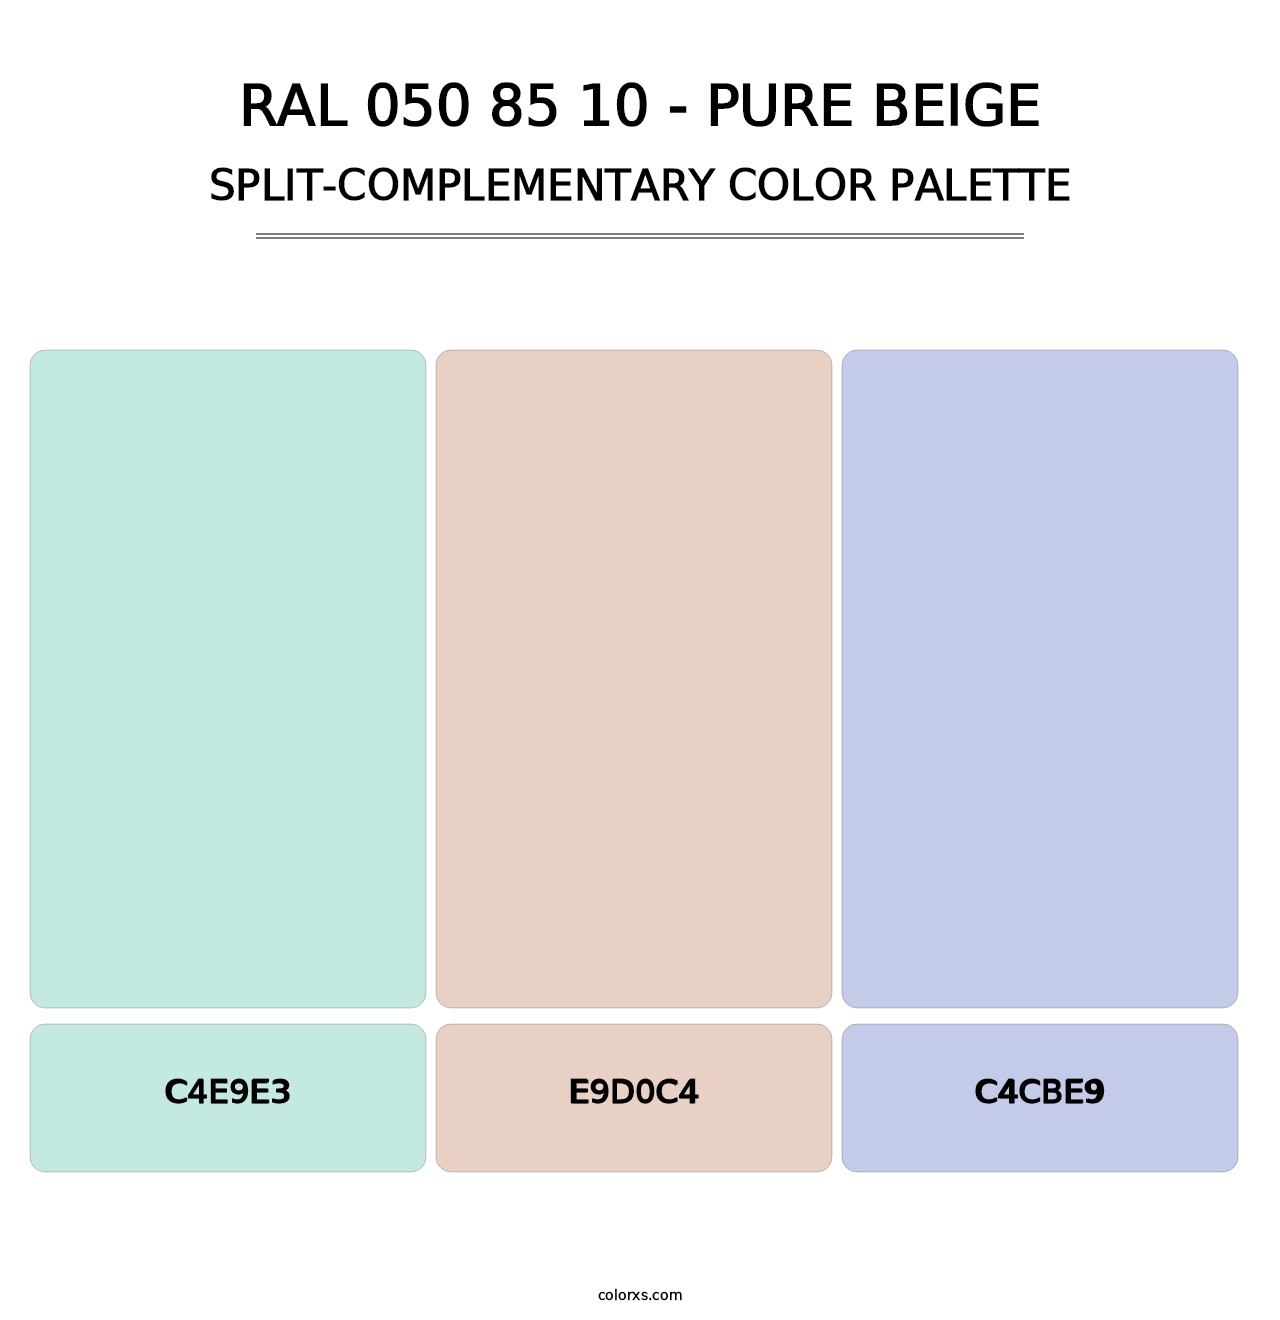 RAL 050 85 10 - Pure Beige - Split-Complementary Color Palette